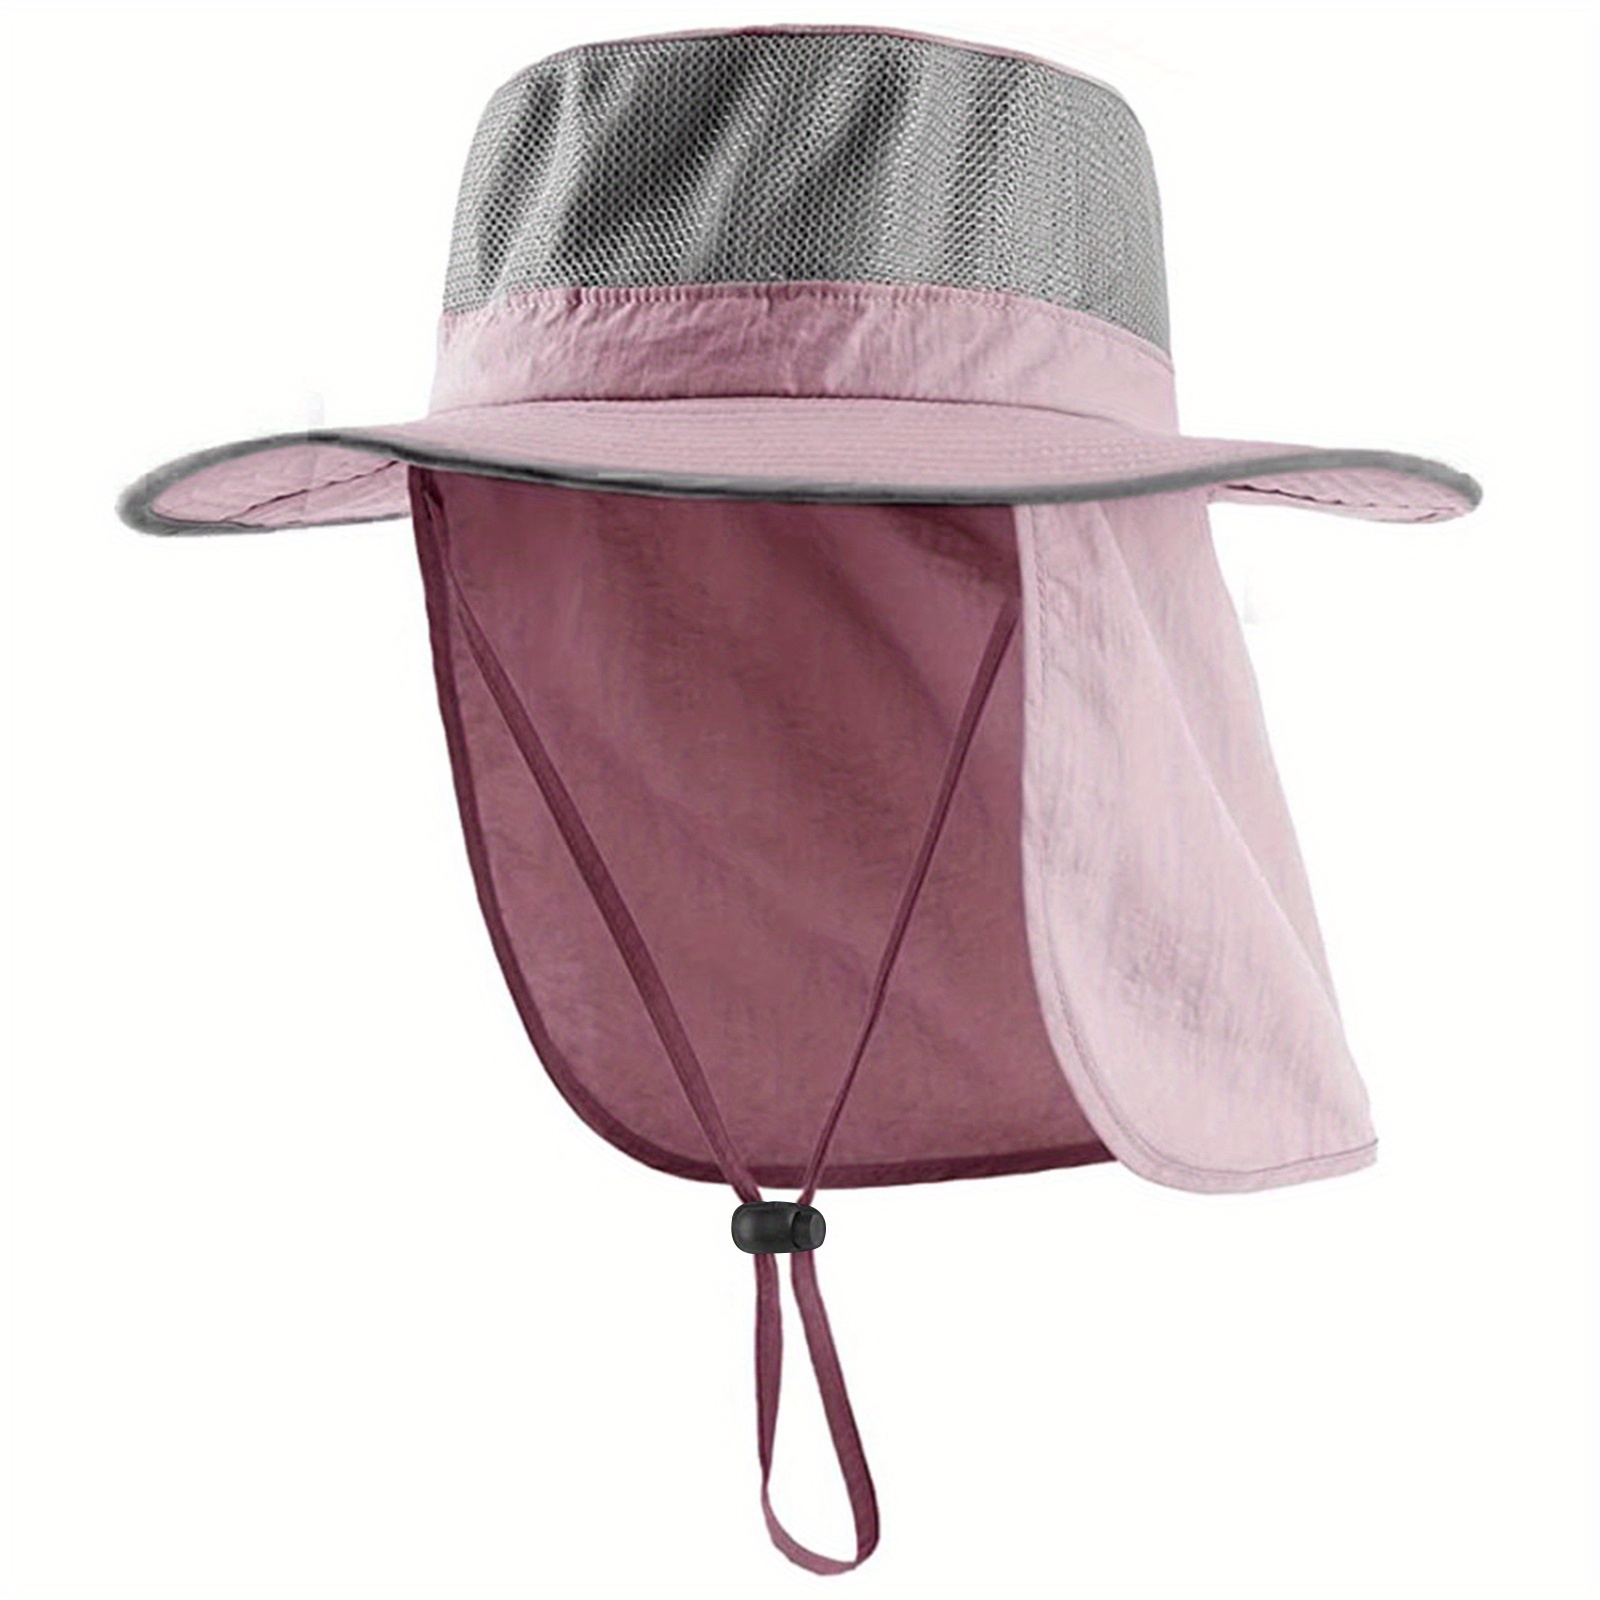 Fishing Hat with Neck Flap UPF 50+ Protection Sun Hat for Men&Women